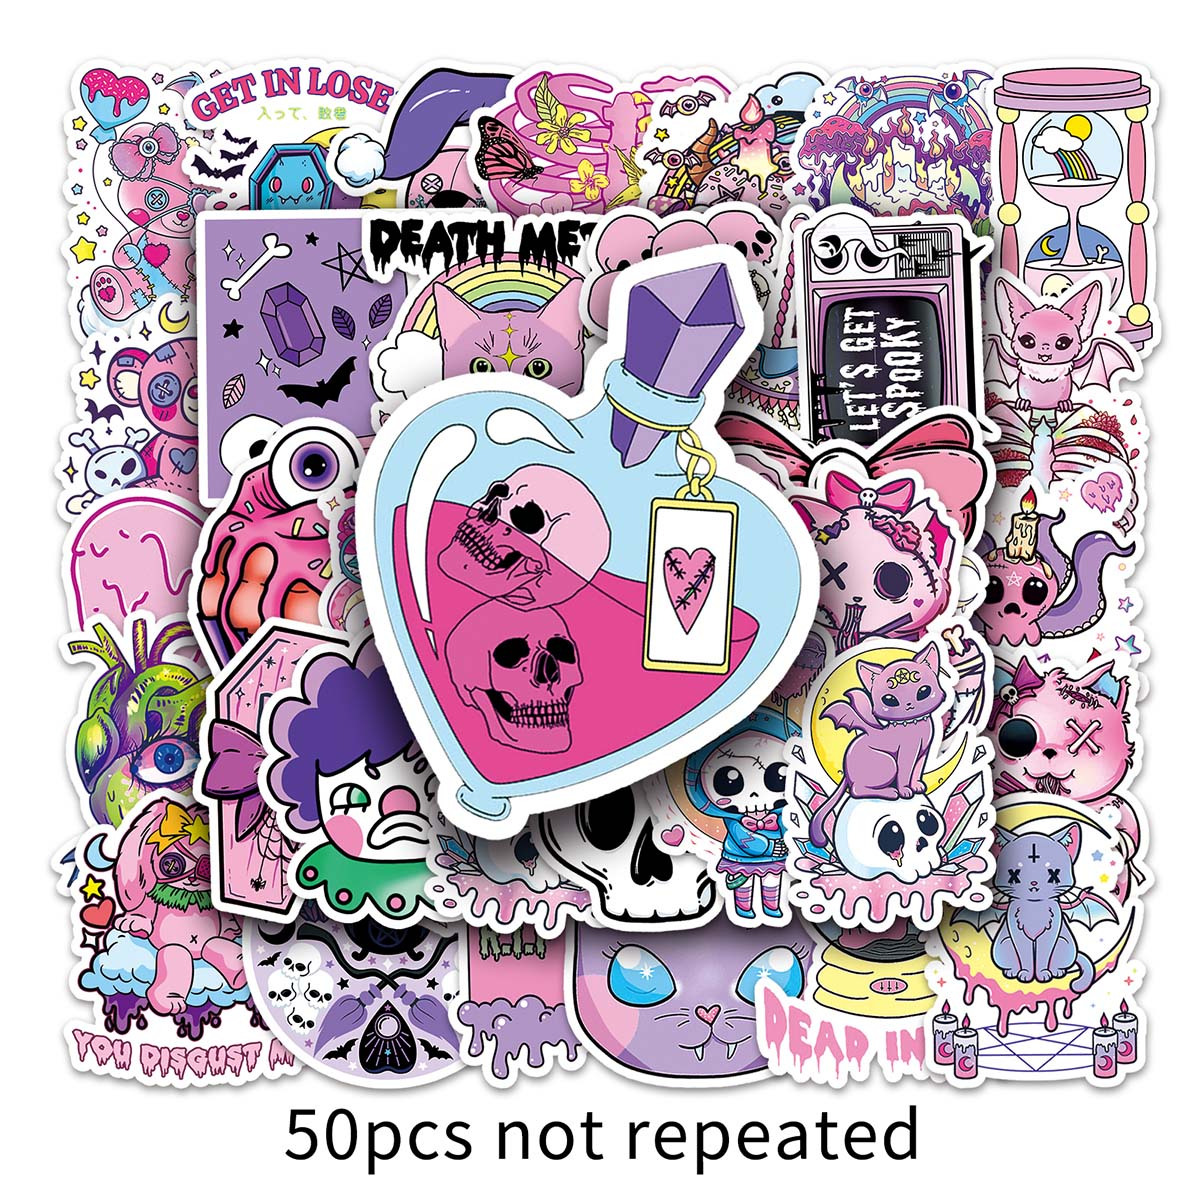 Get Perfect Pastel Goth Sticker Here With A Big Discount